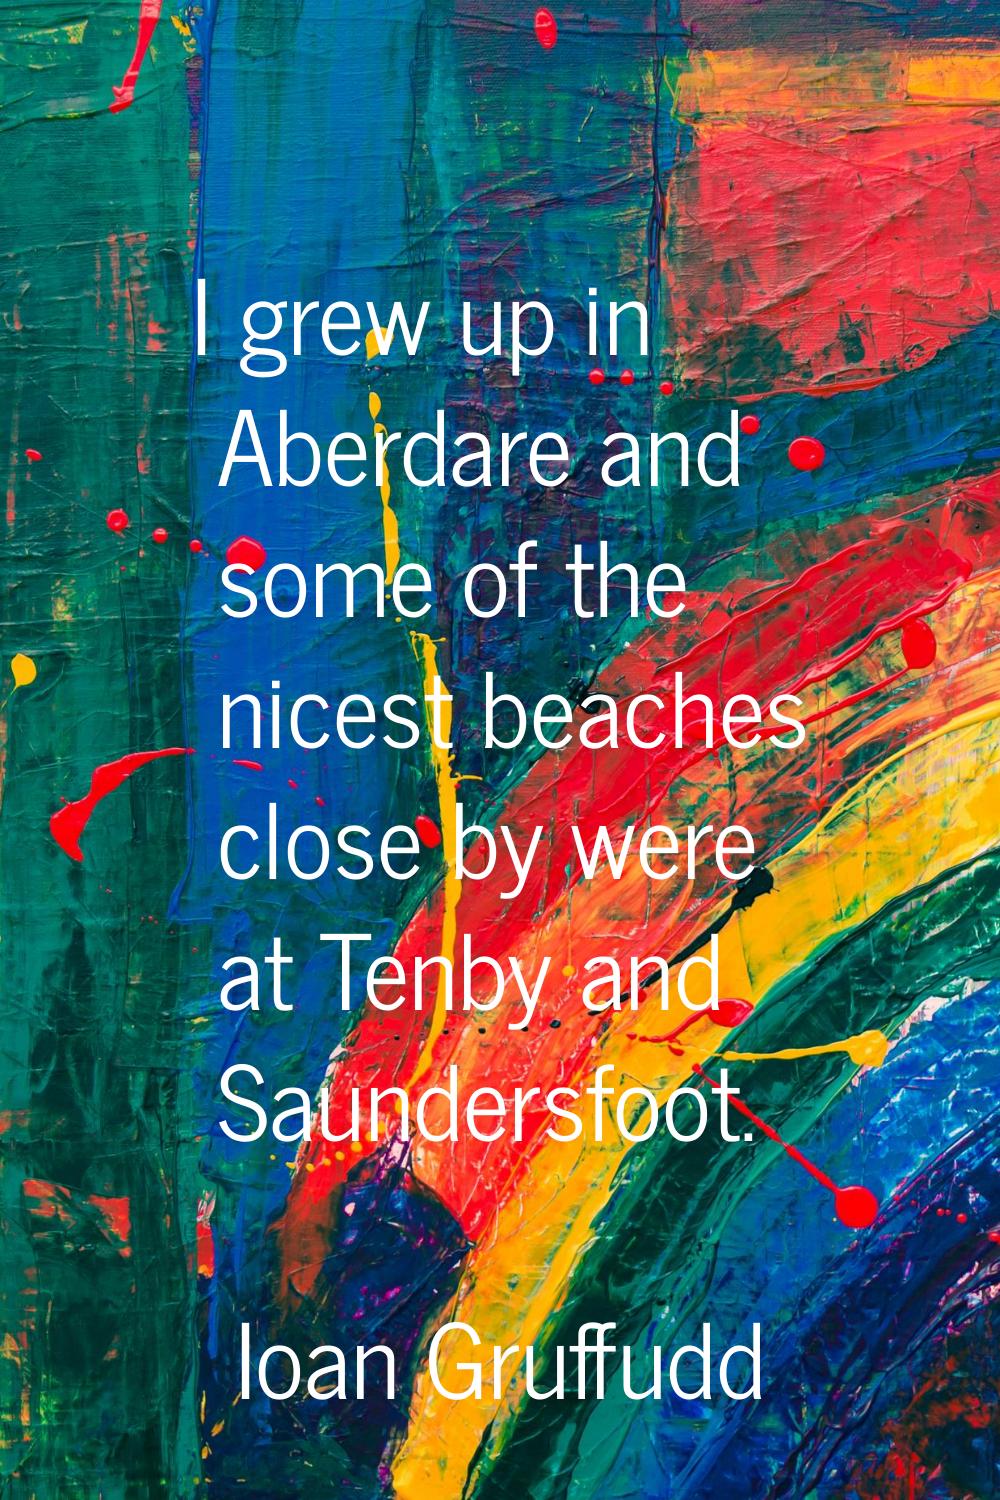 I grew up in Aberdare and some of the nicest beaches close by were at Tenby and Saundersfoot.